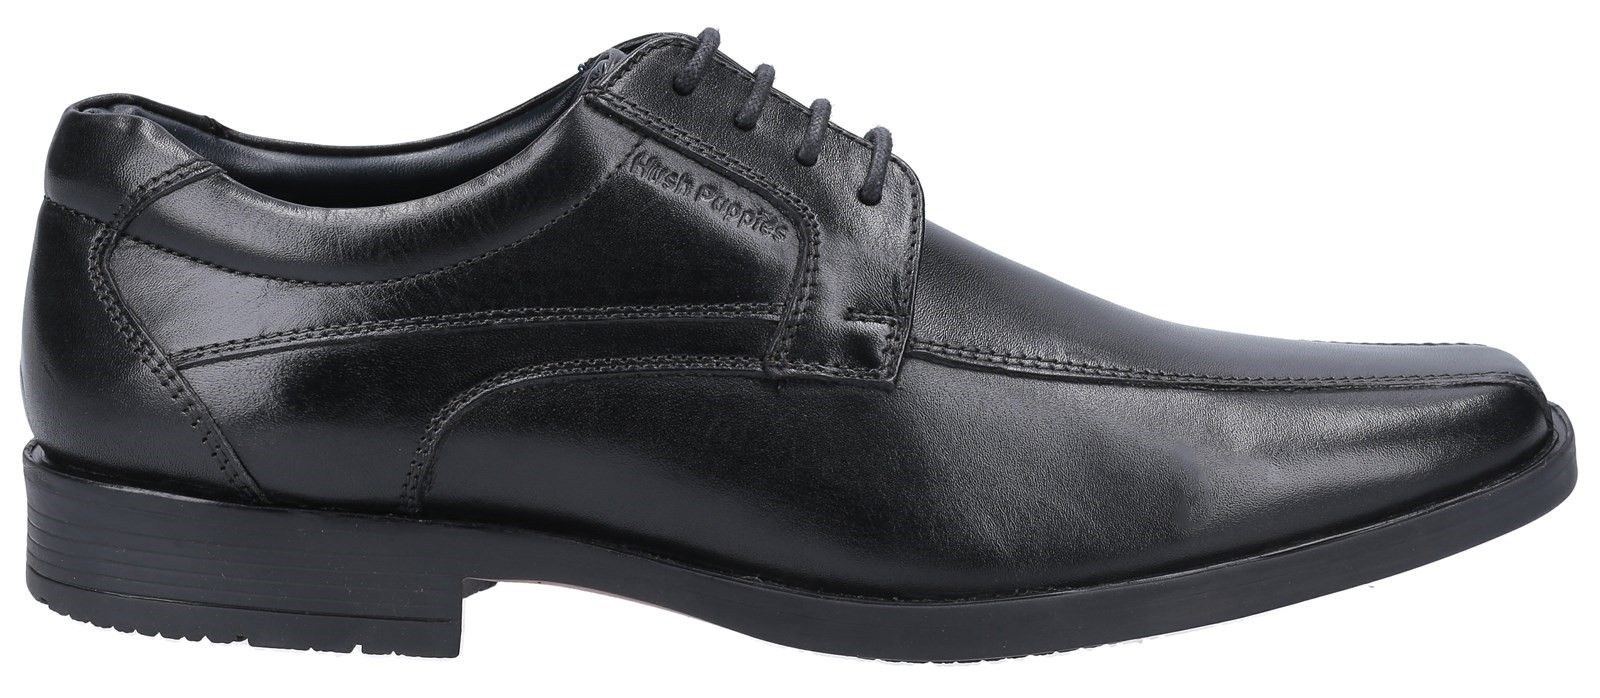 Classic Boys Back to School shoe from Hush Puppies - Brandon crafted with premium leather uppers in a smart lace up apron toe seam style, with comfortable memory foam sock and flexible soleSmart Leather Upper. 
Apron Toe Seam. 
Lace Up Fastening.. 
Flexible Rubber Sole. 
Memory Foam Sock.